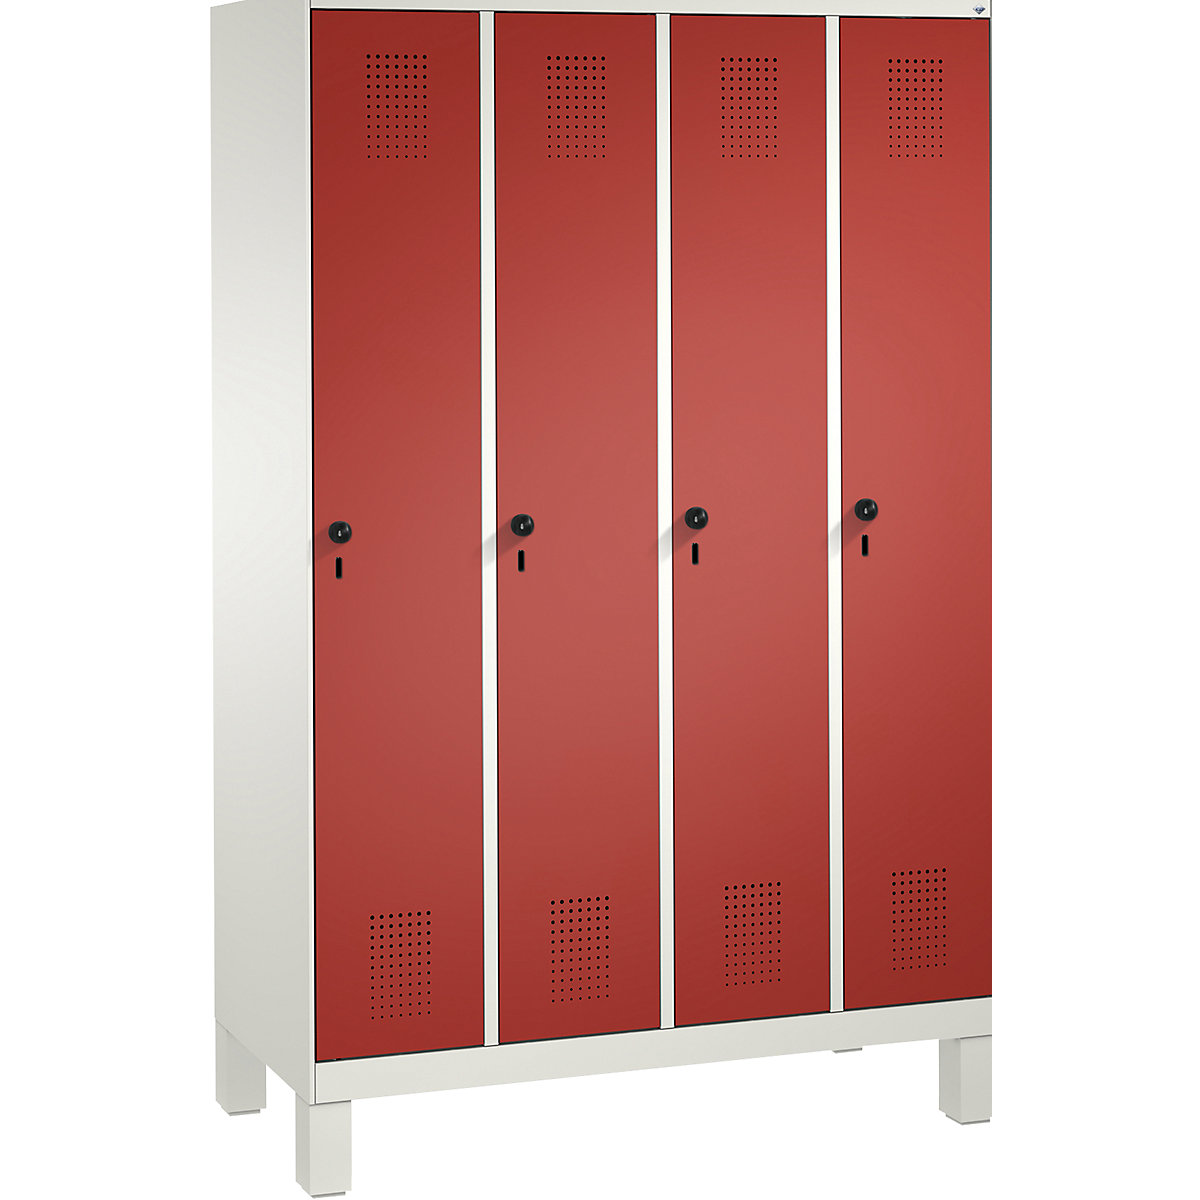 EVOLO cloakroom locker, with feet – C+P, 4 compartments, compartment width 300 mm, traffic white / flame red-13